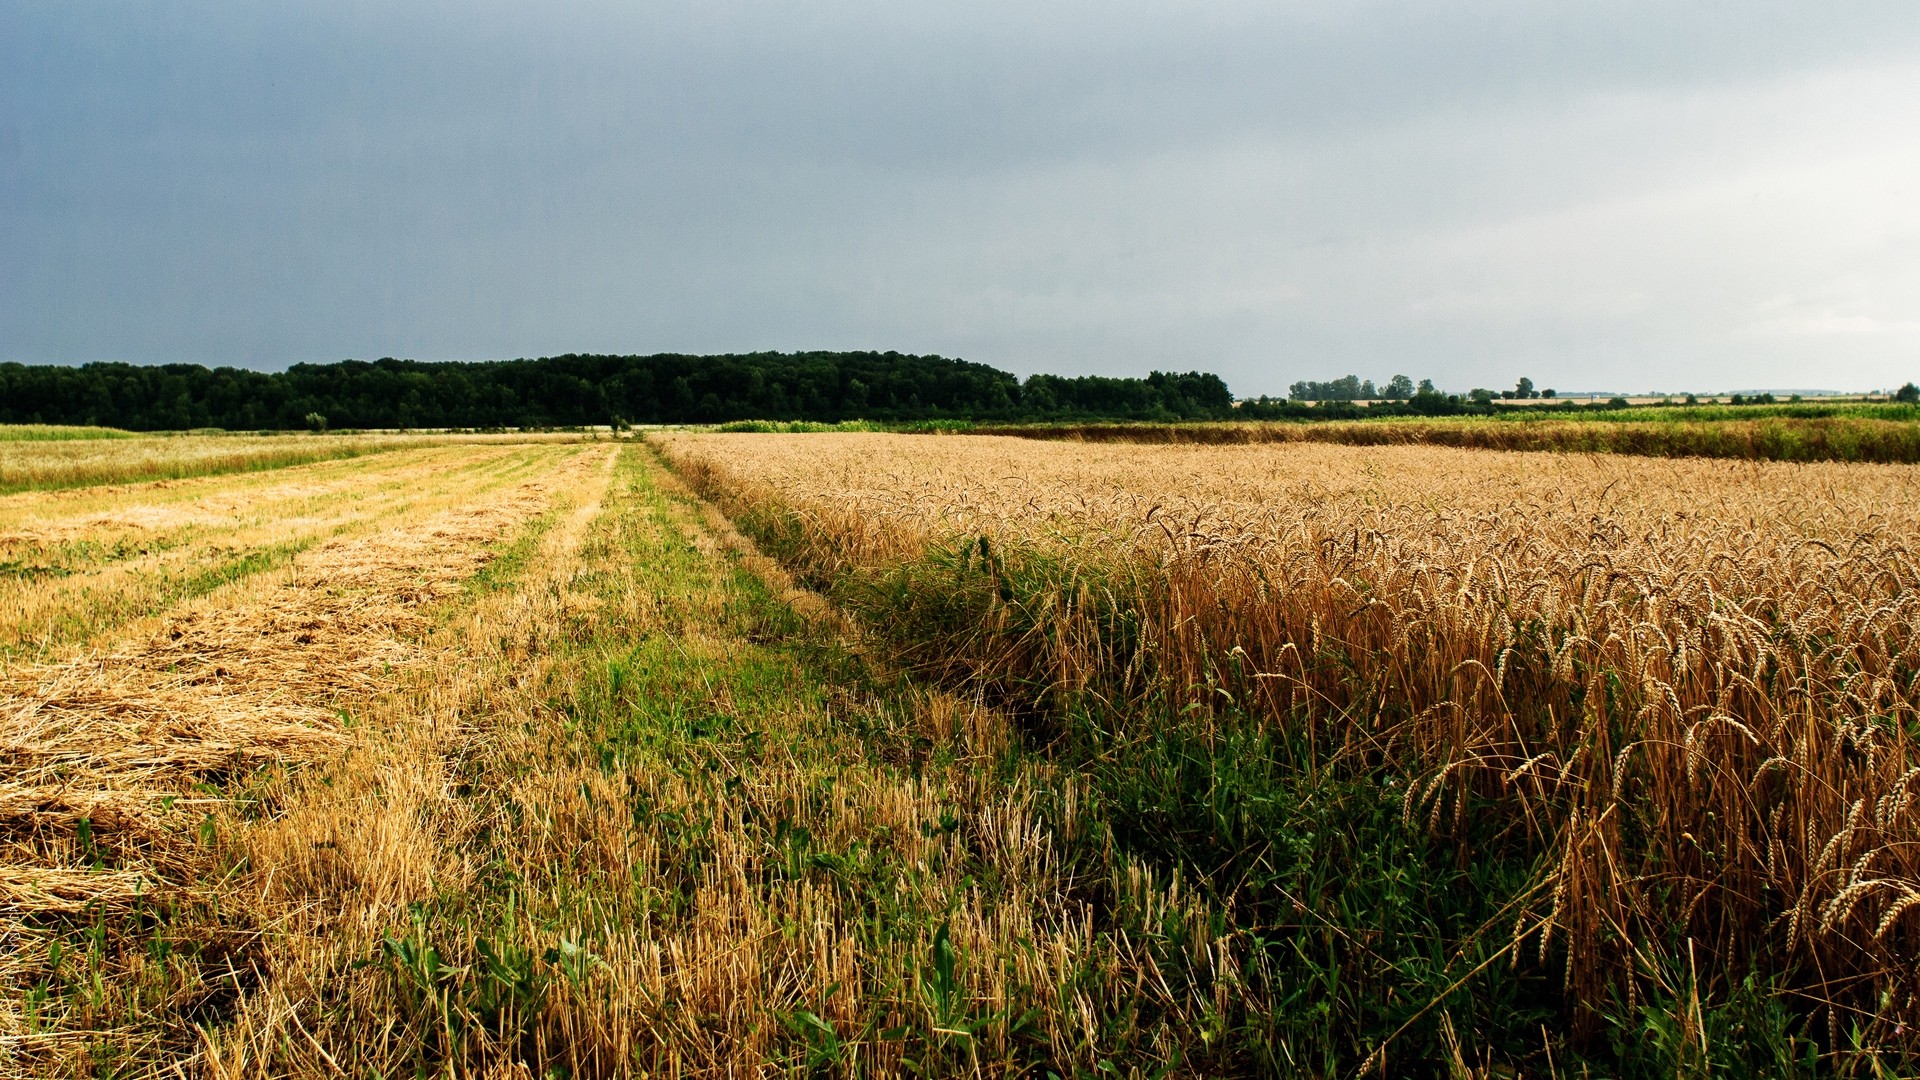 1920x1080 wallpapers: field, agriculture, Ukraine (image)